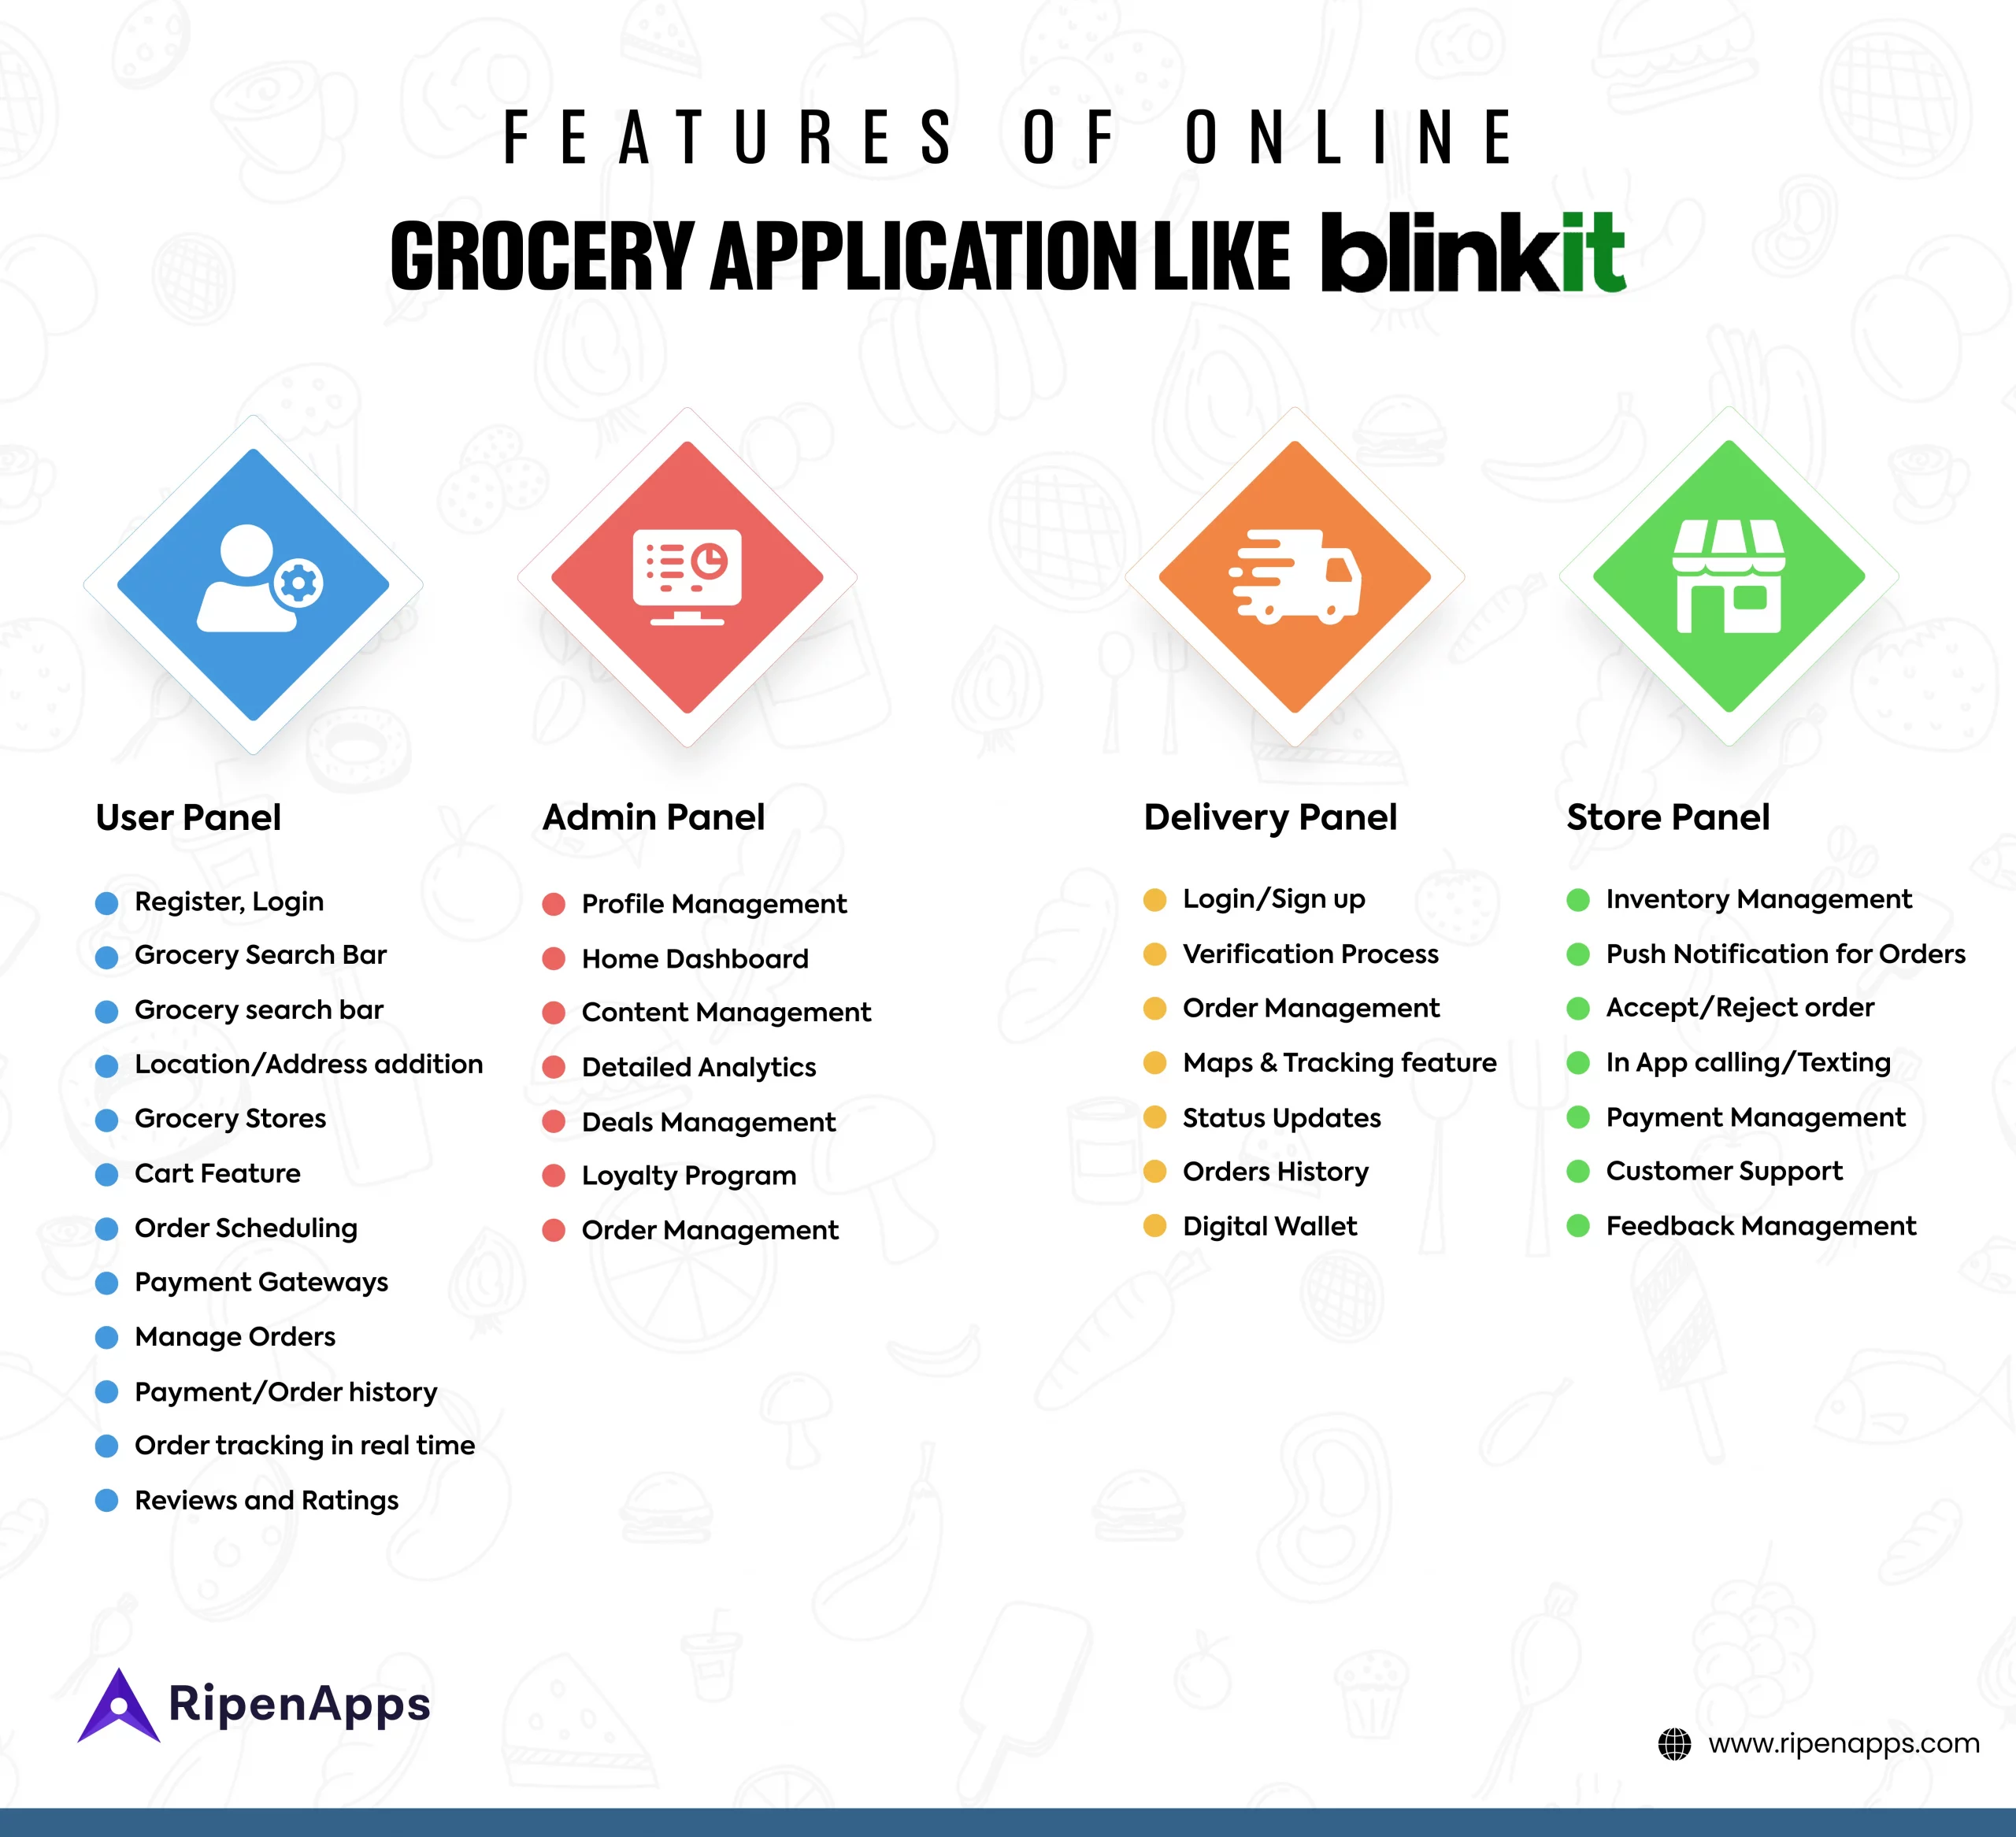 Features Of Online Grocery Application Like Blinkit